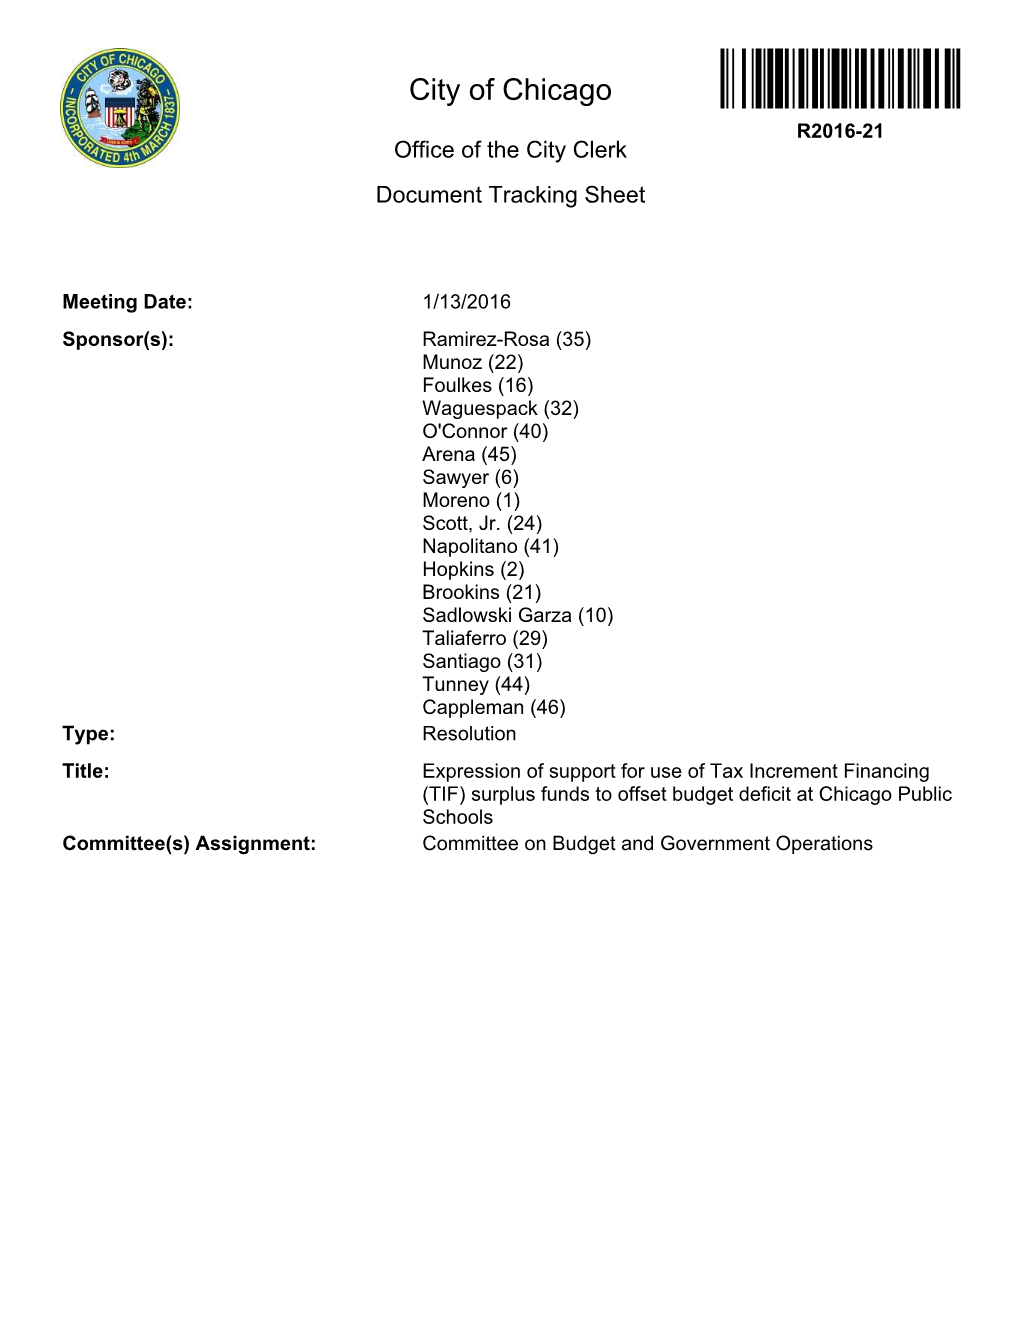 City of Chicago R2016-21 Office of the City Clerk Document Tracking Sheet